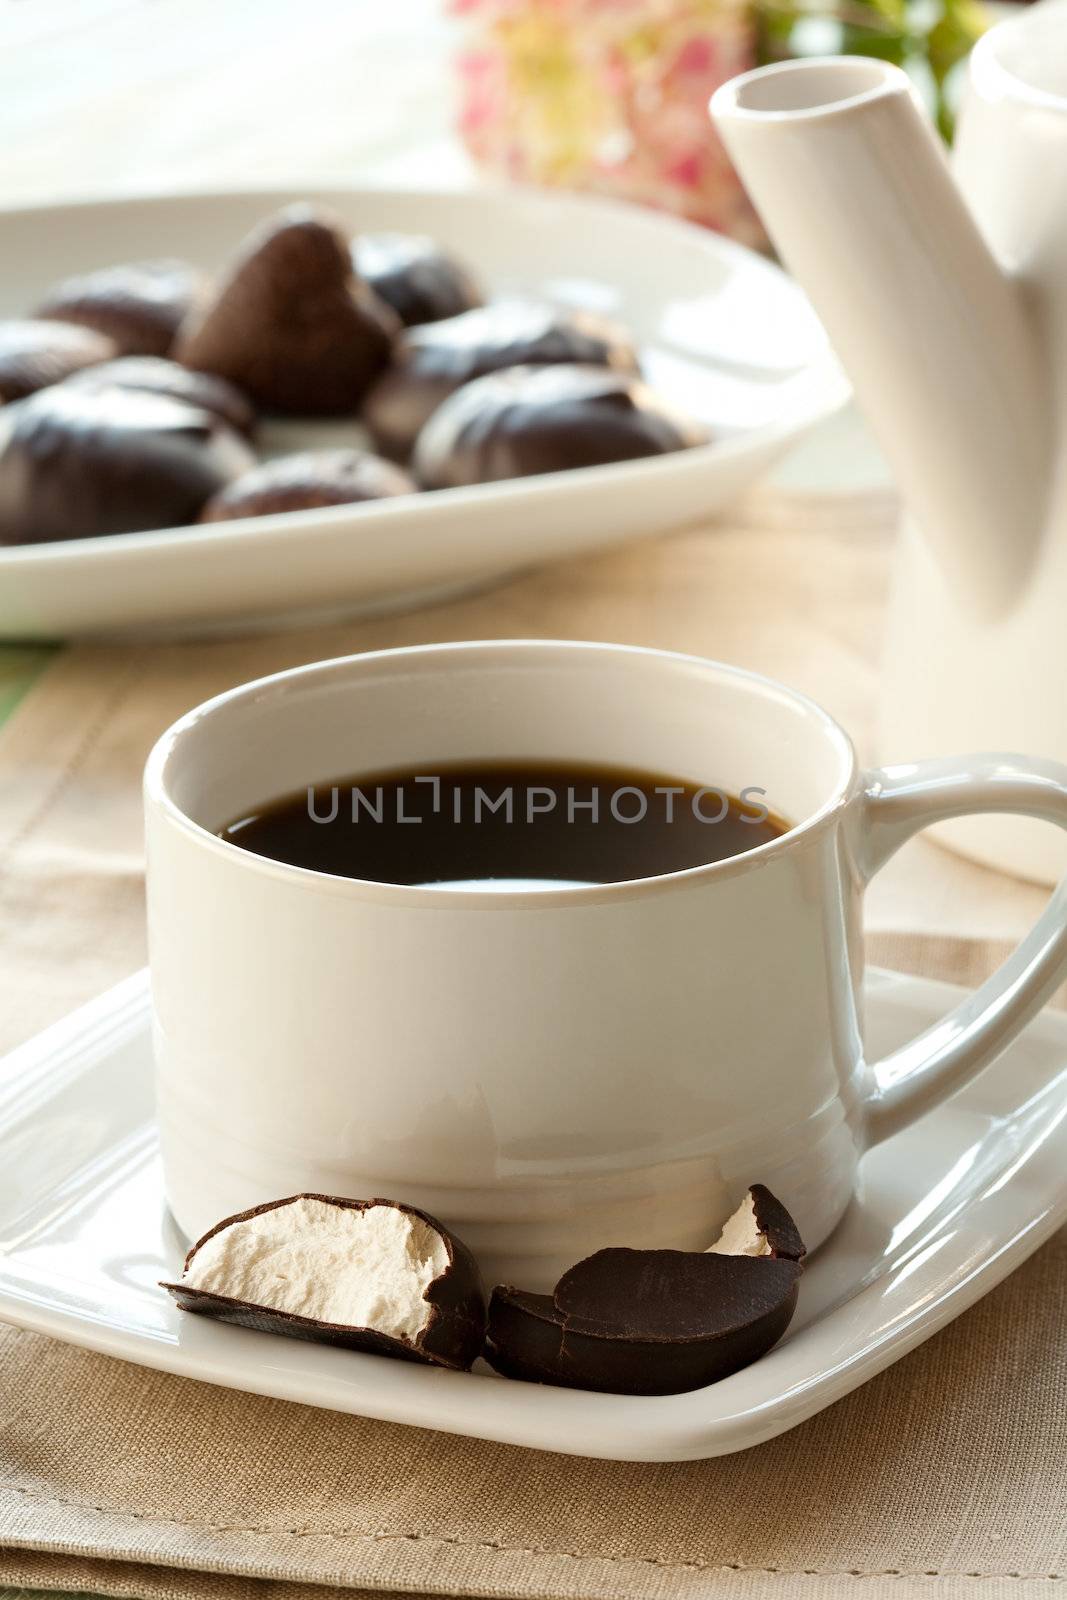 A cup of coffee, zephyr in chocolate and candy